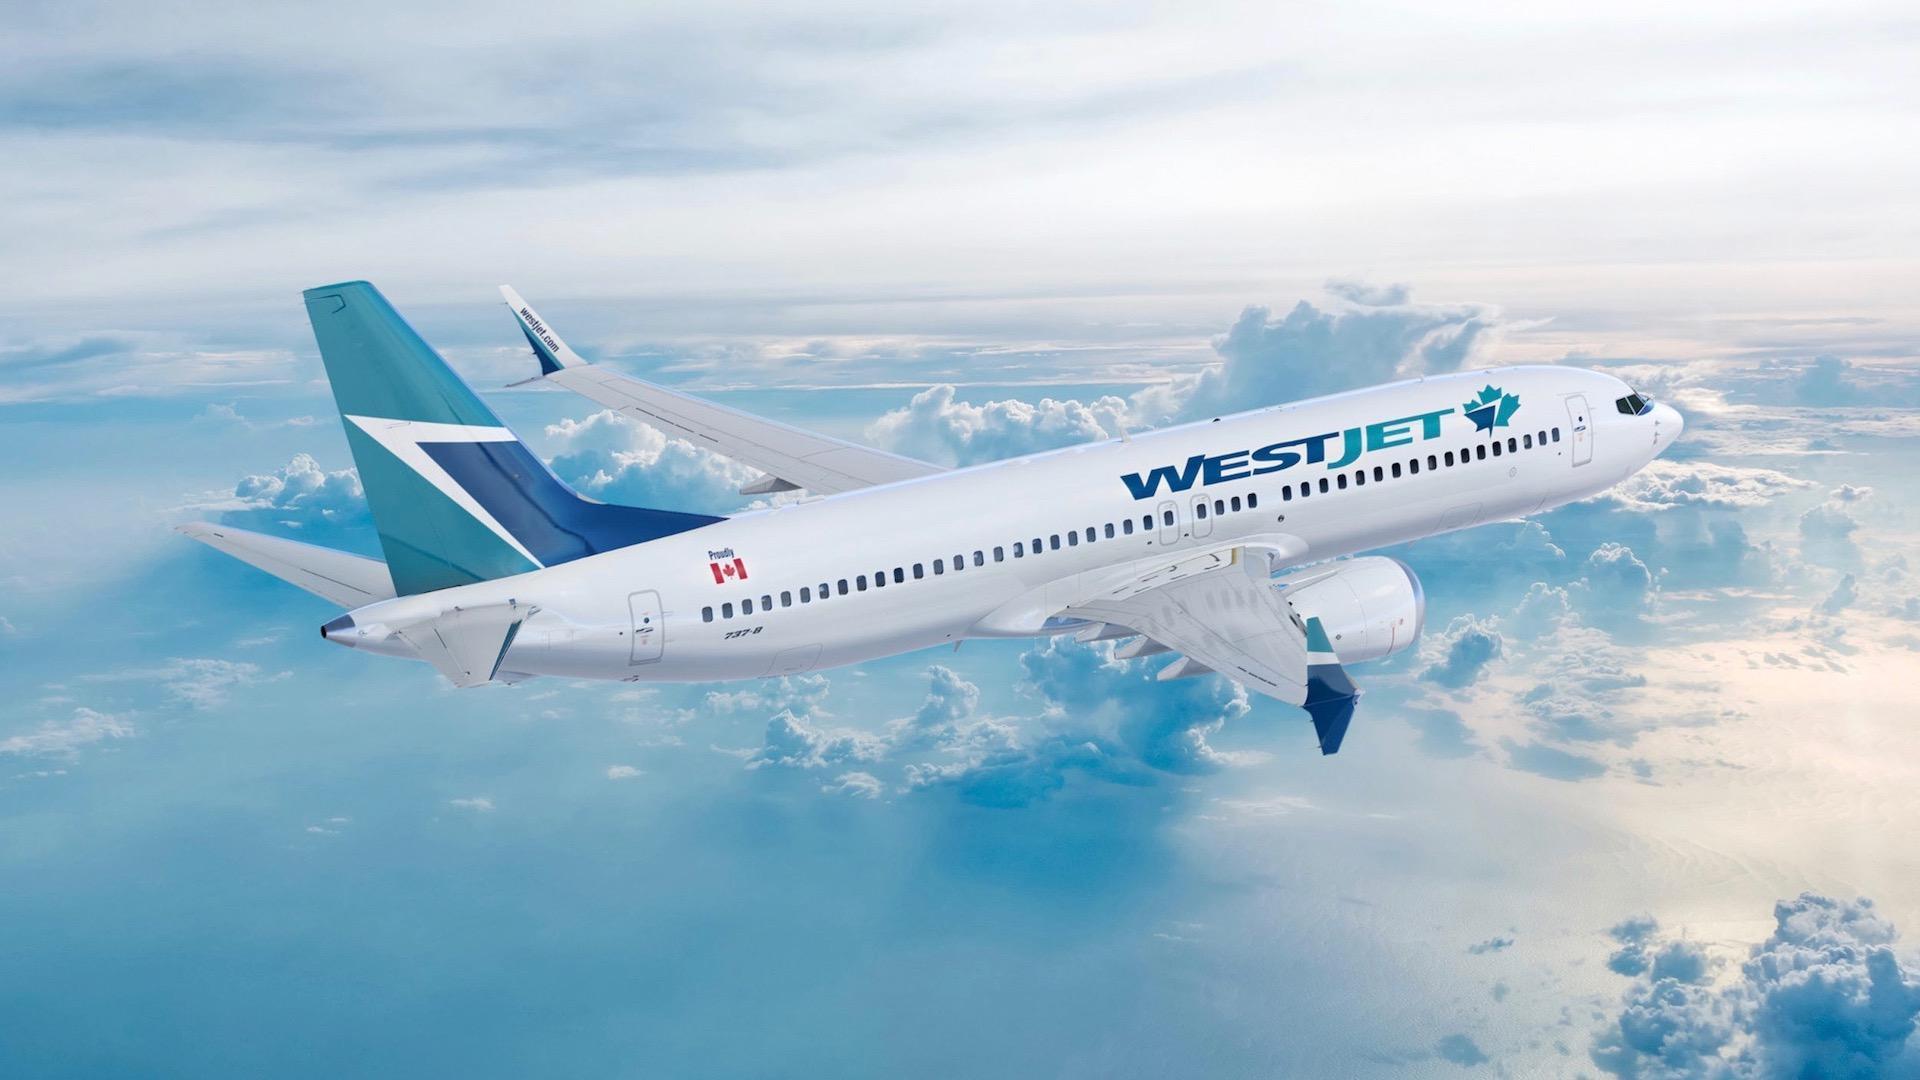 travel protection westjet vacations